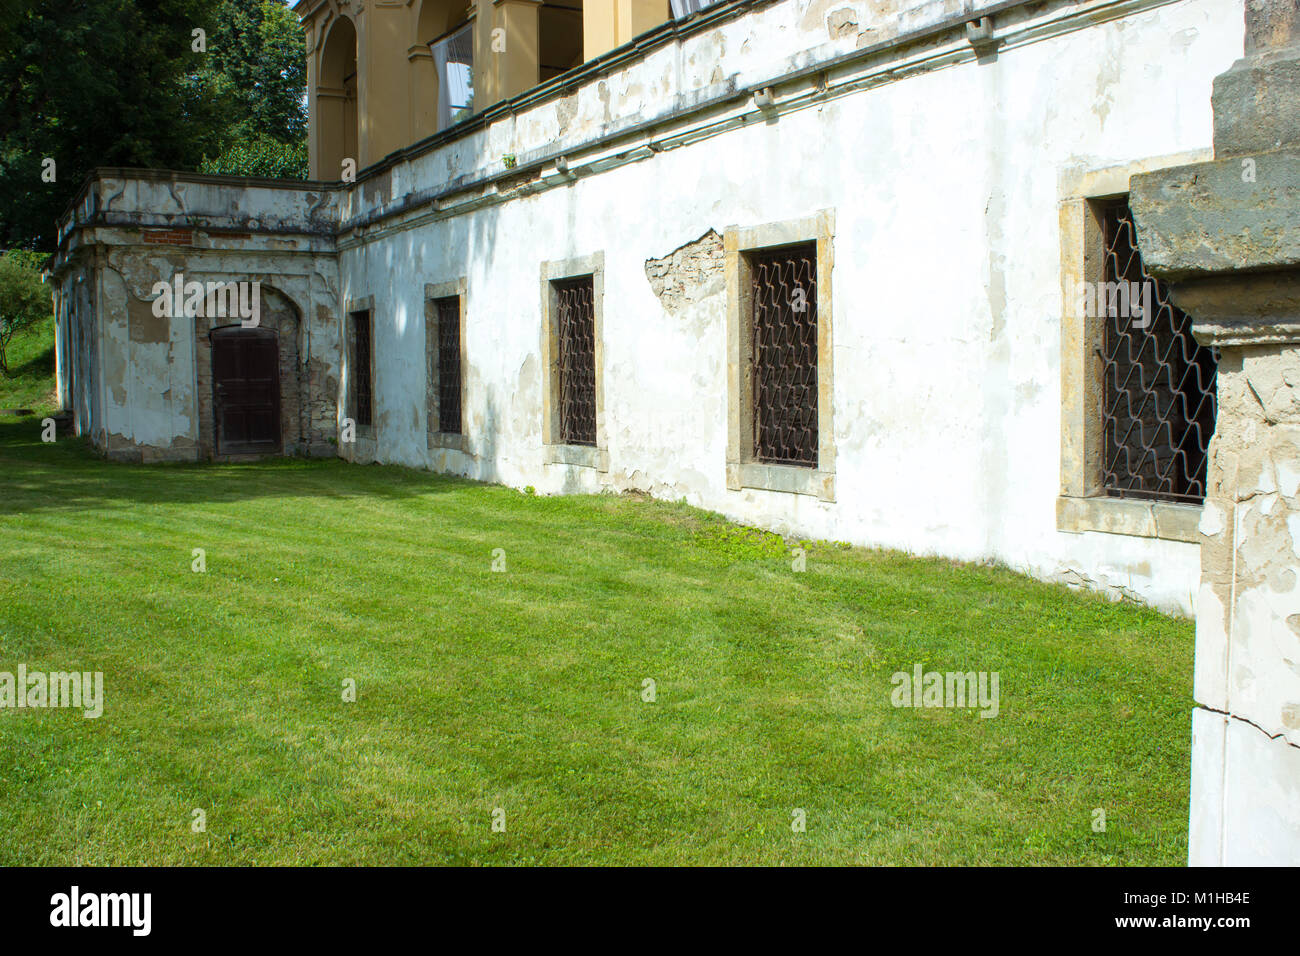 View of old flaked walls and barred windows of the building. The lawn is cut in the foreground. Stock Photo